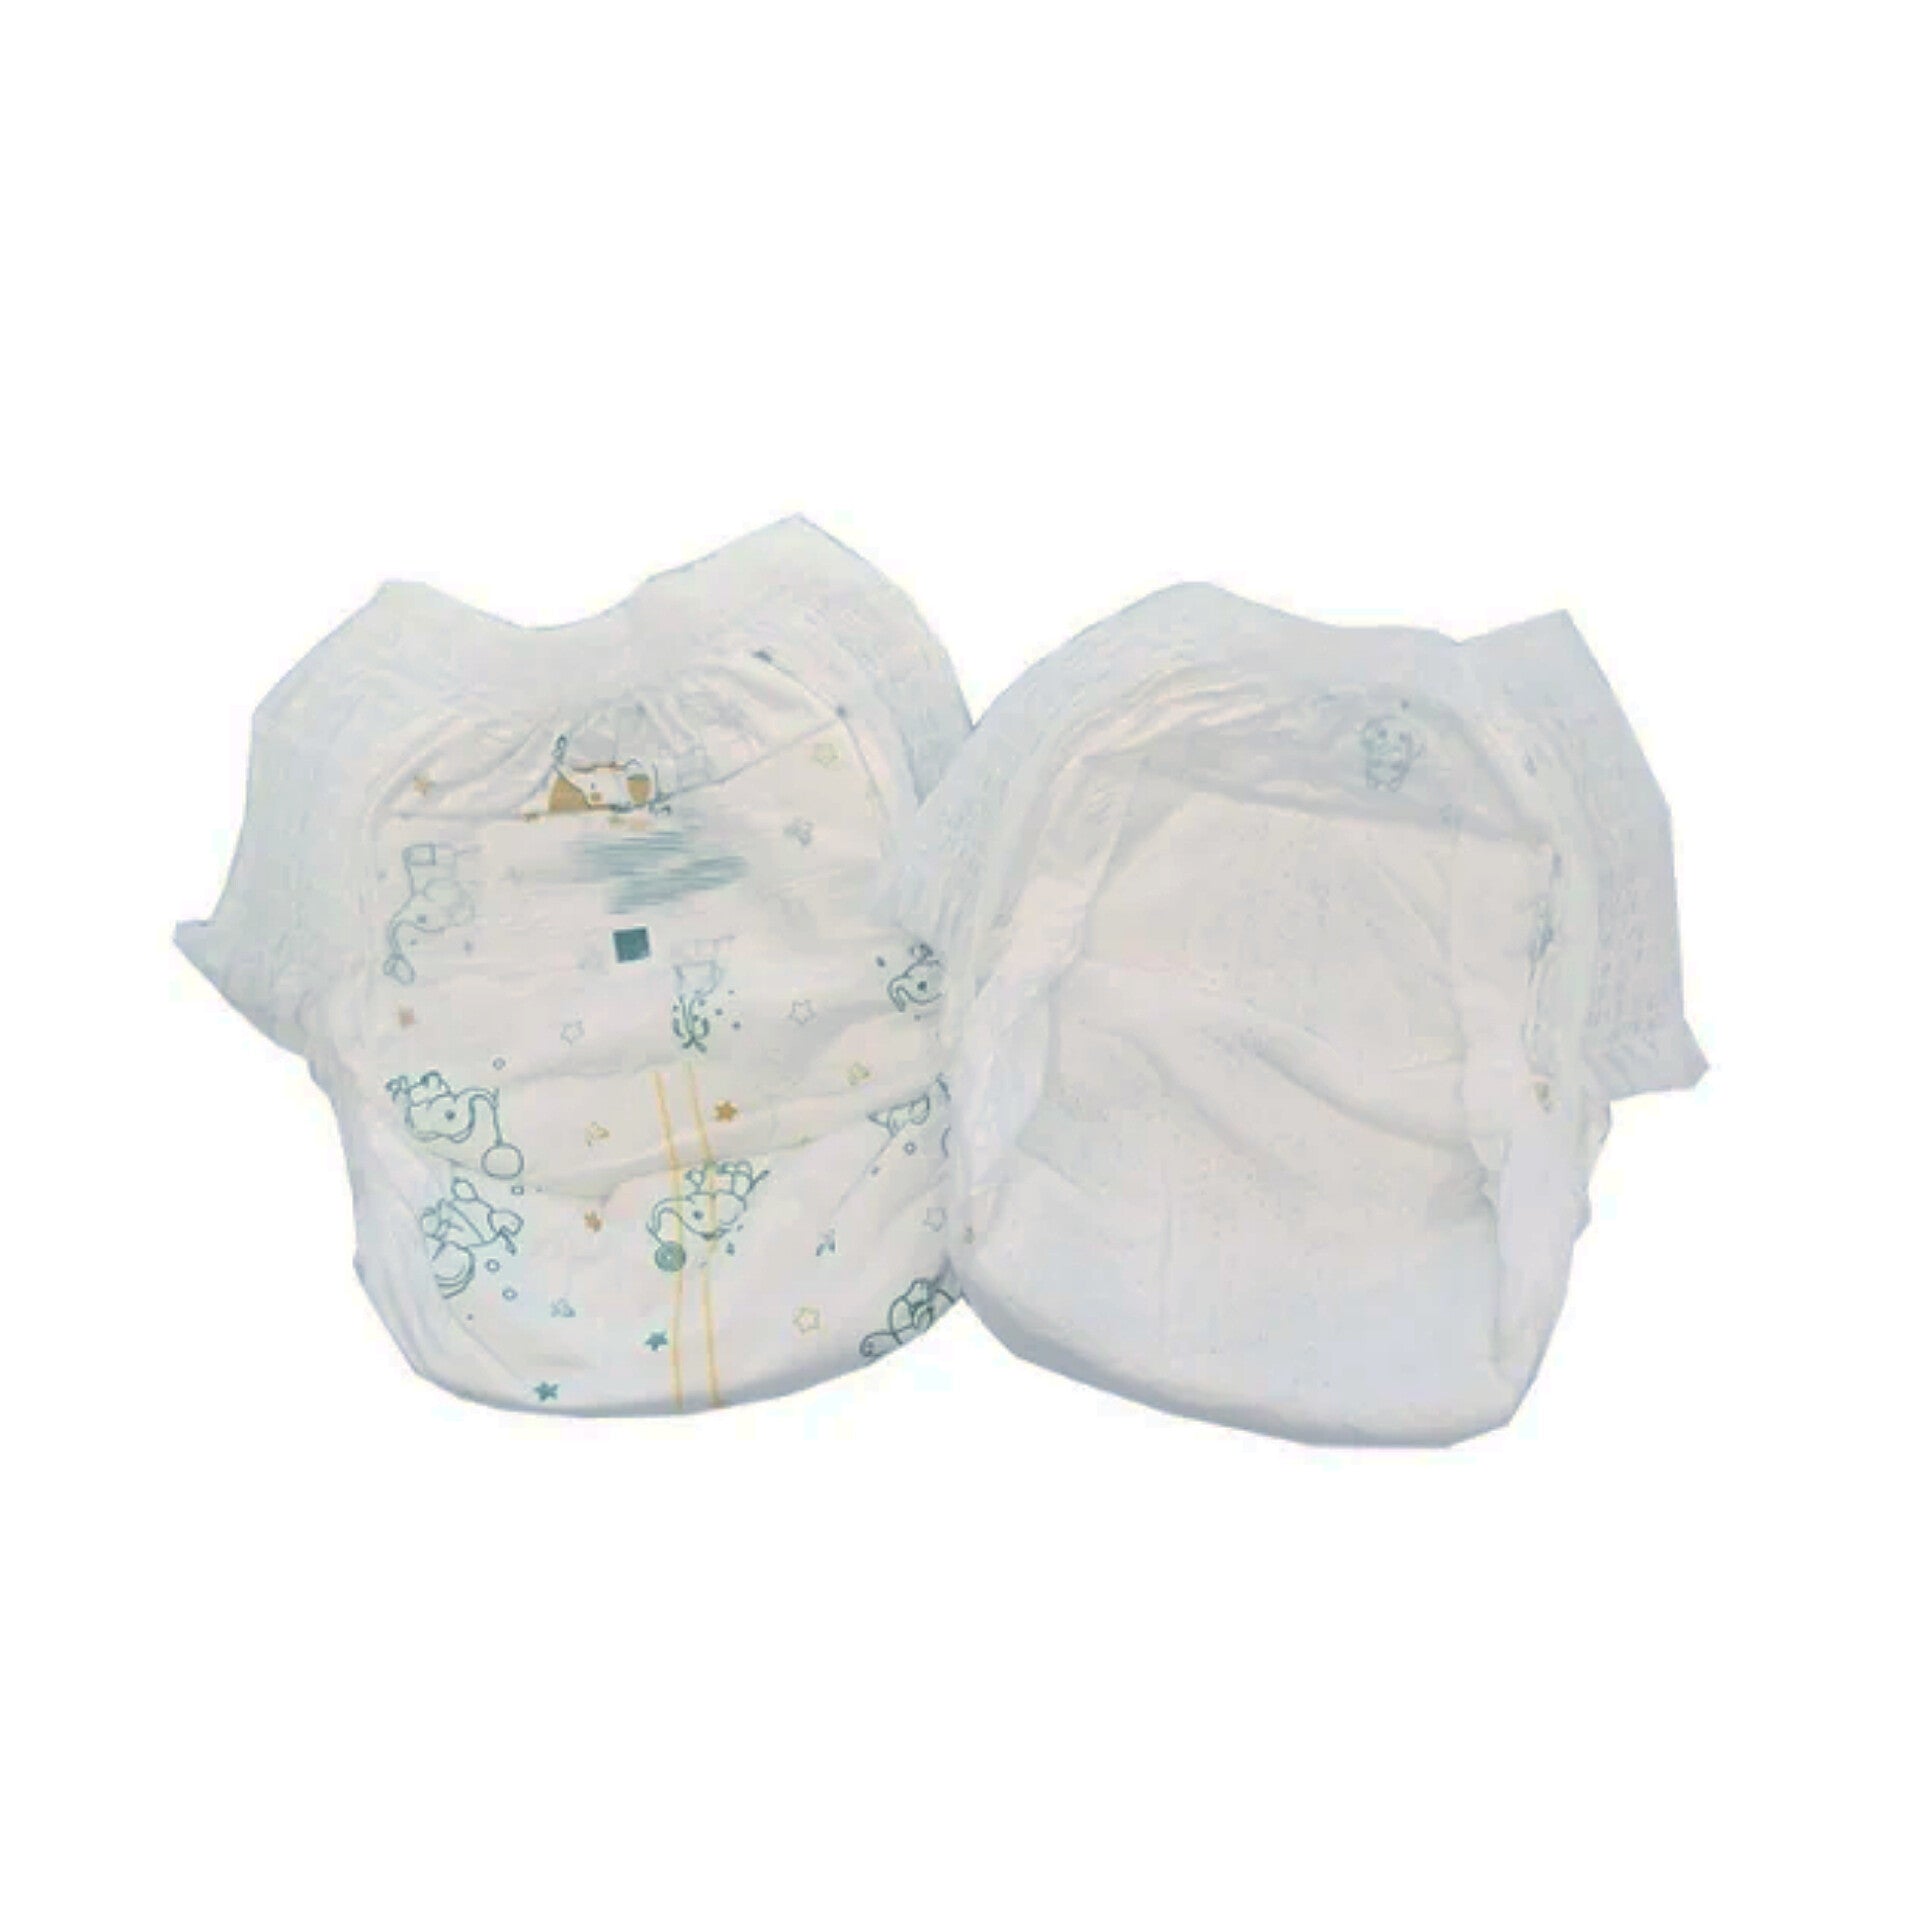 Euromix Pullup Nappy Pants Size 5 - Diaper Yard Gh